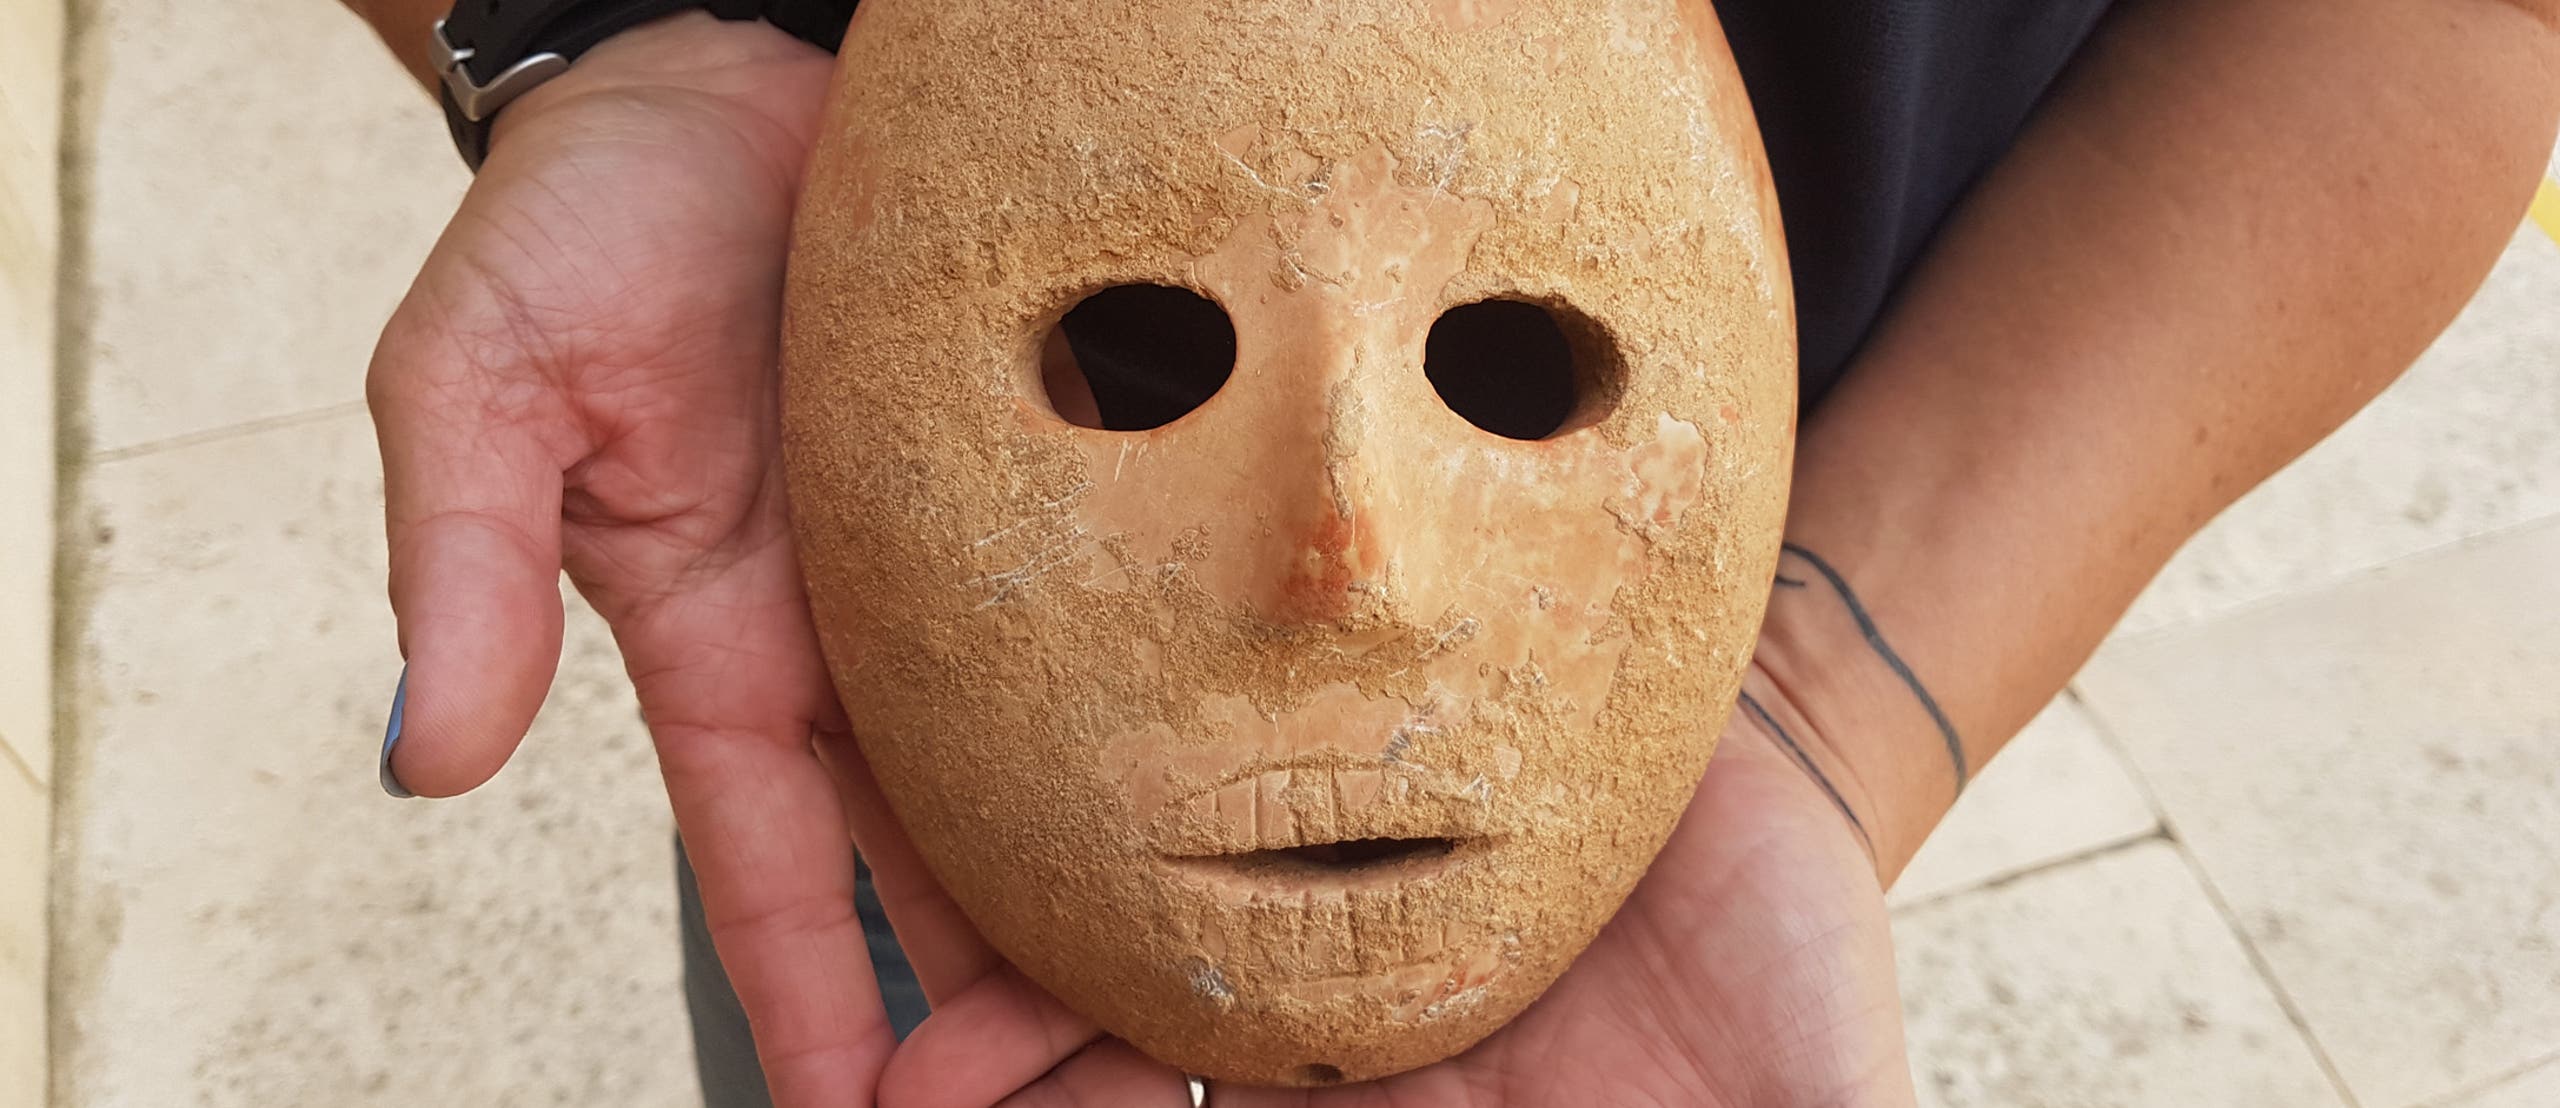 The 9,000-year-old mask found in the Hebron hills by a settler going for a walk. Credit: Antiquities Theft Prevention Unit, Israel Antiquities Authority